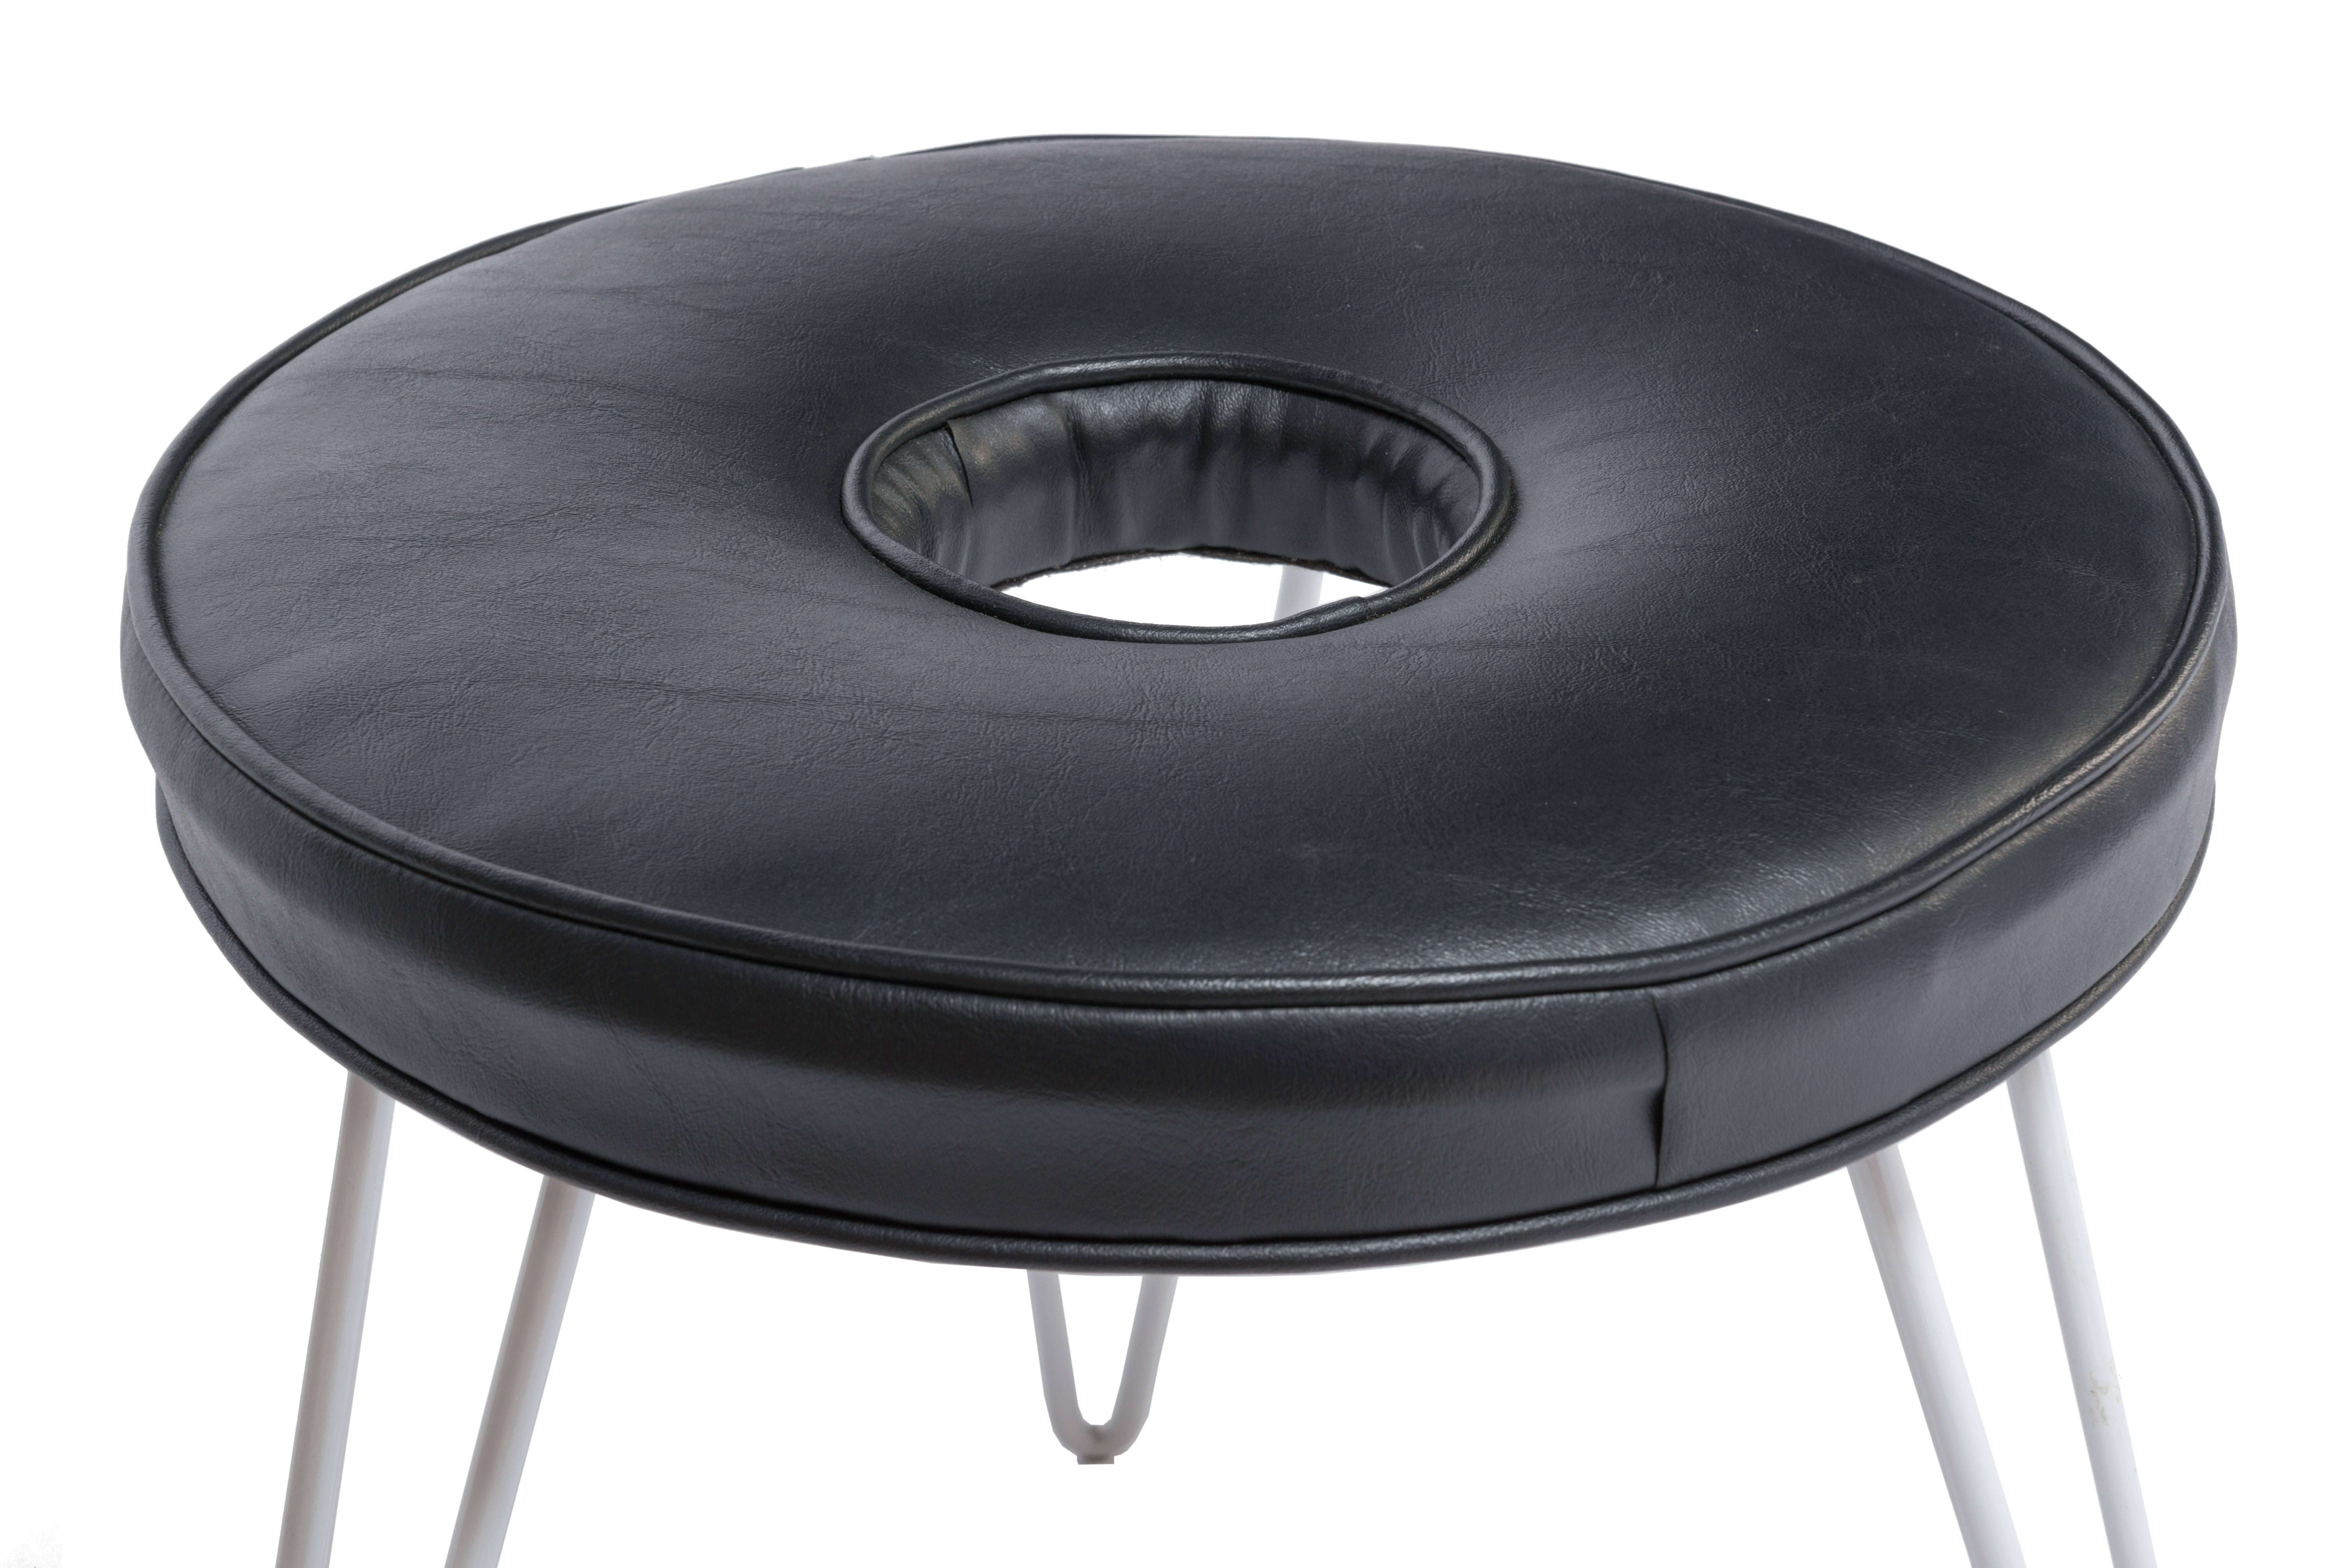 American William Armbruster Donut Stool MoMA